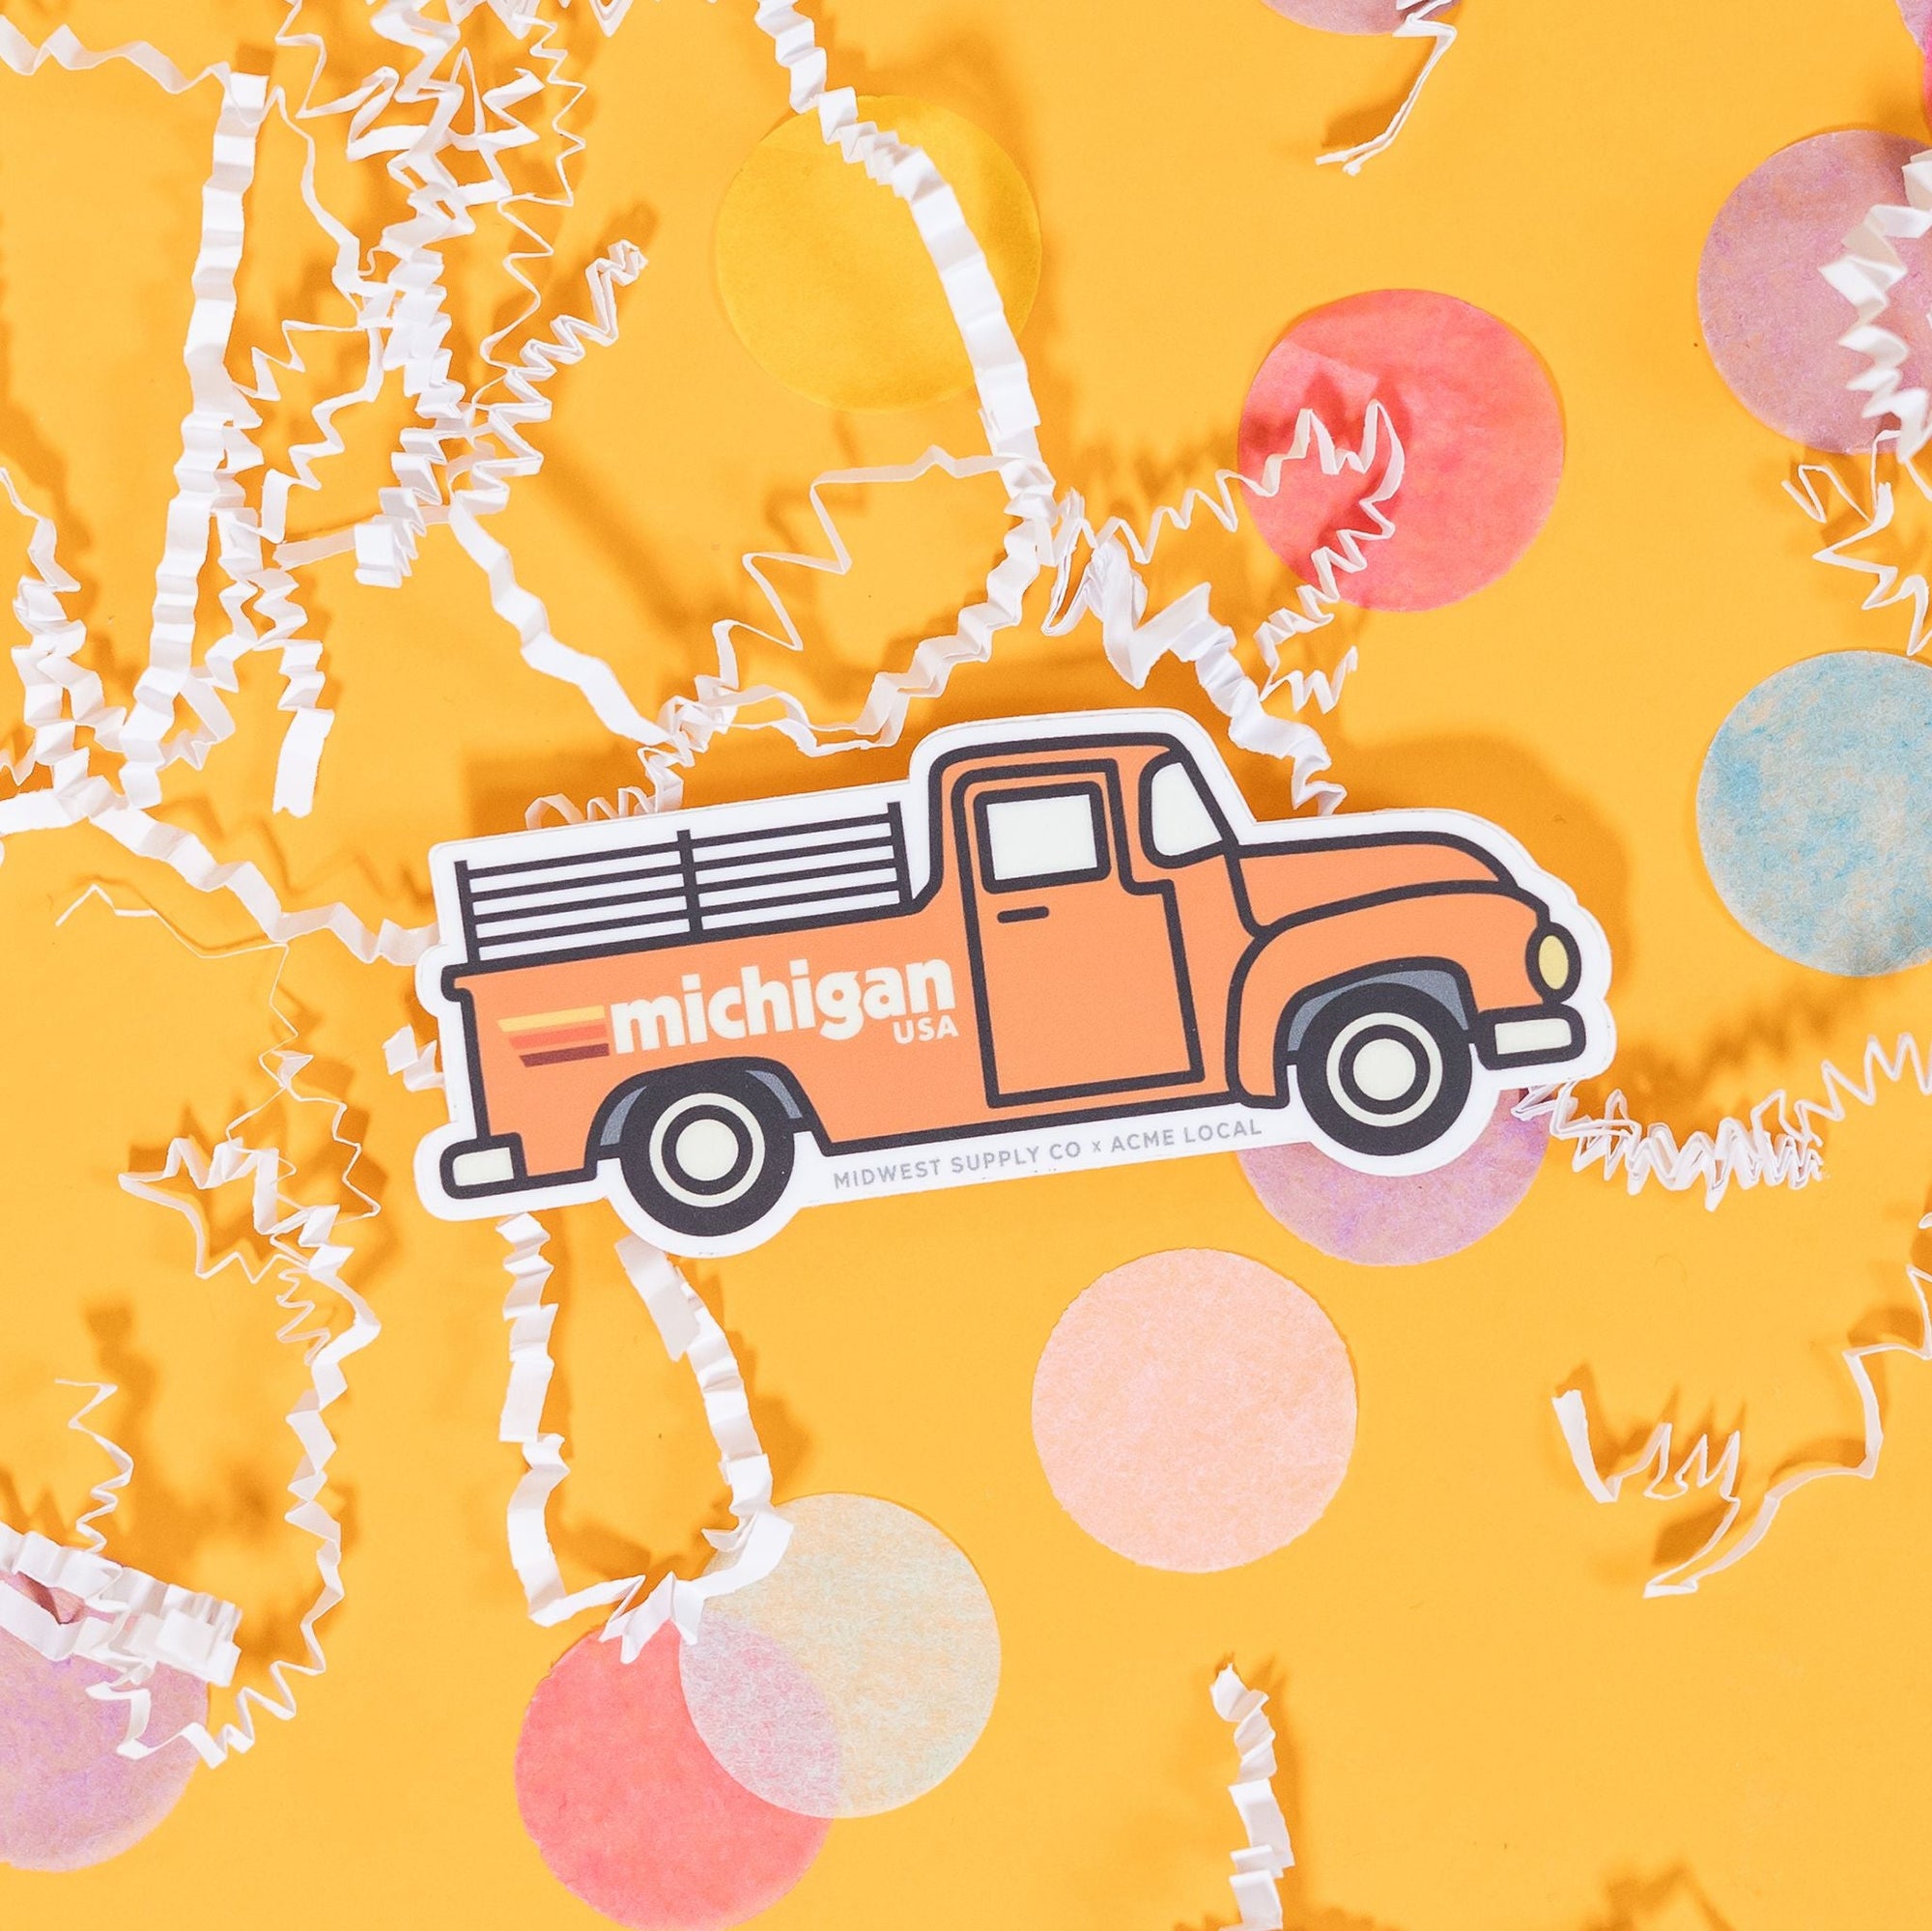 On a sunny mustard background sits a sticker with white crinkle and big, colorful confetti scattered around. This white sticker has an illustration of a vintage red truck with black outlines and it says "michigan USA" in white block lettering with three stripes. The stripes colors are yellow, coral, and maroon. 2"-3"